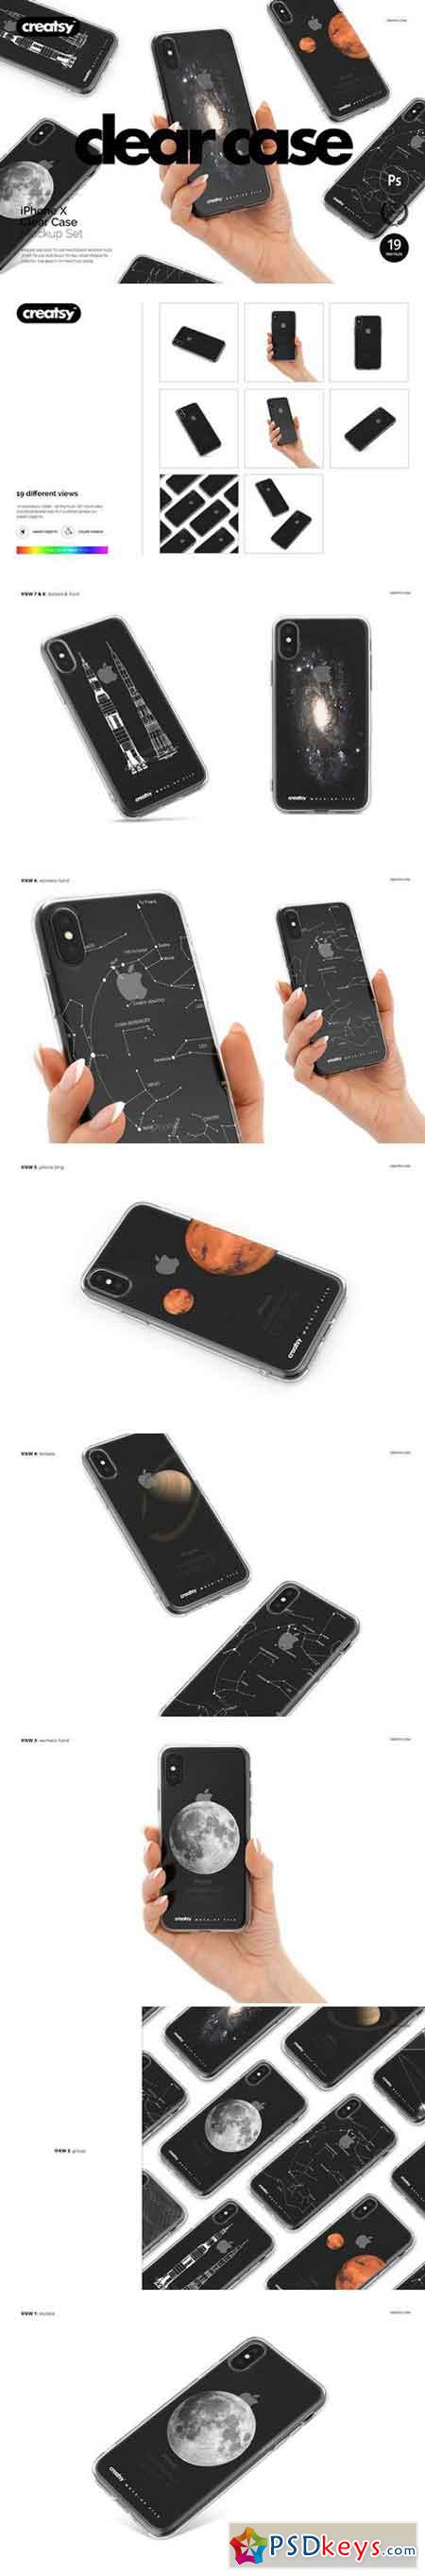 Download iPhone X Clear Case Mockup Set 1975452 » Free Download Photoshop Vector Stock image Via Torrent ...